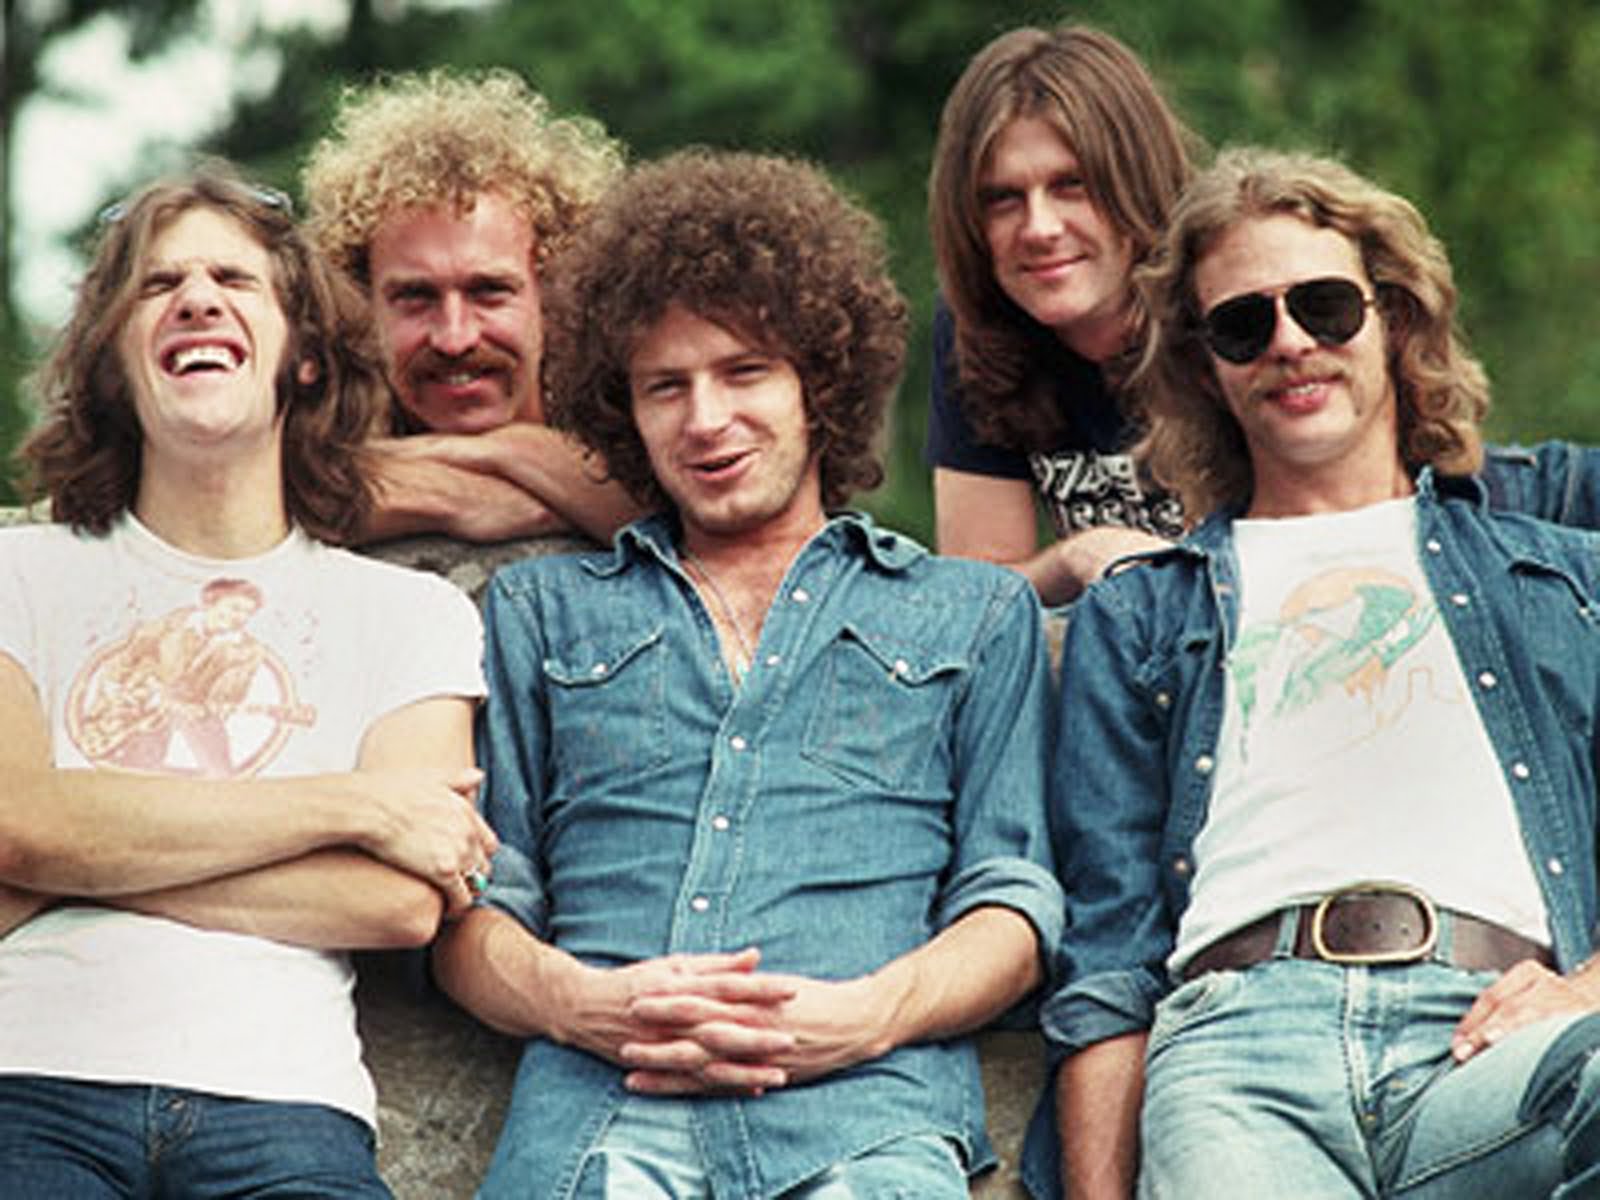 Revise tenses in your ESL class with a classic Eagles song!